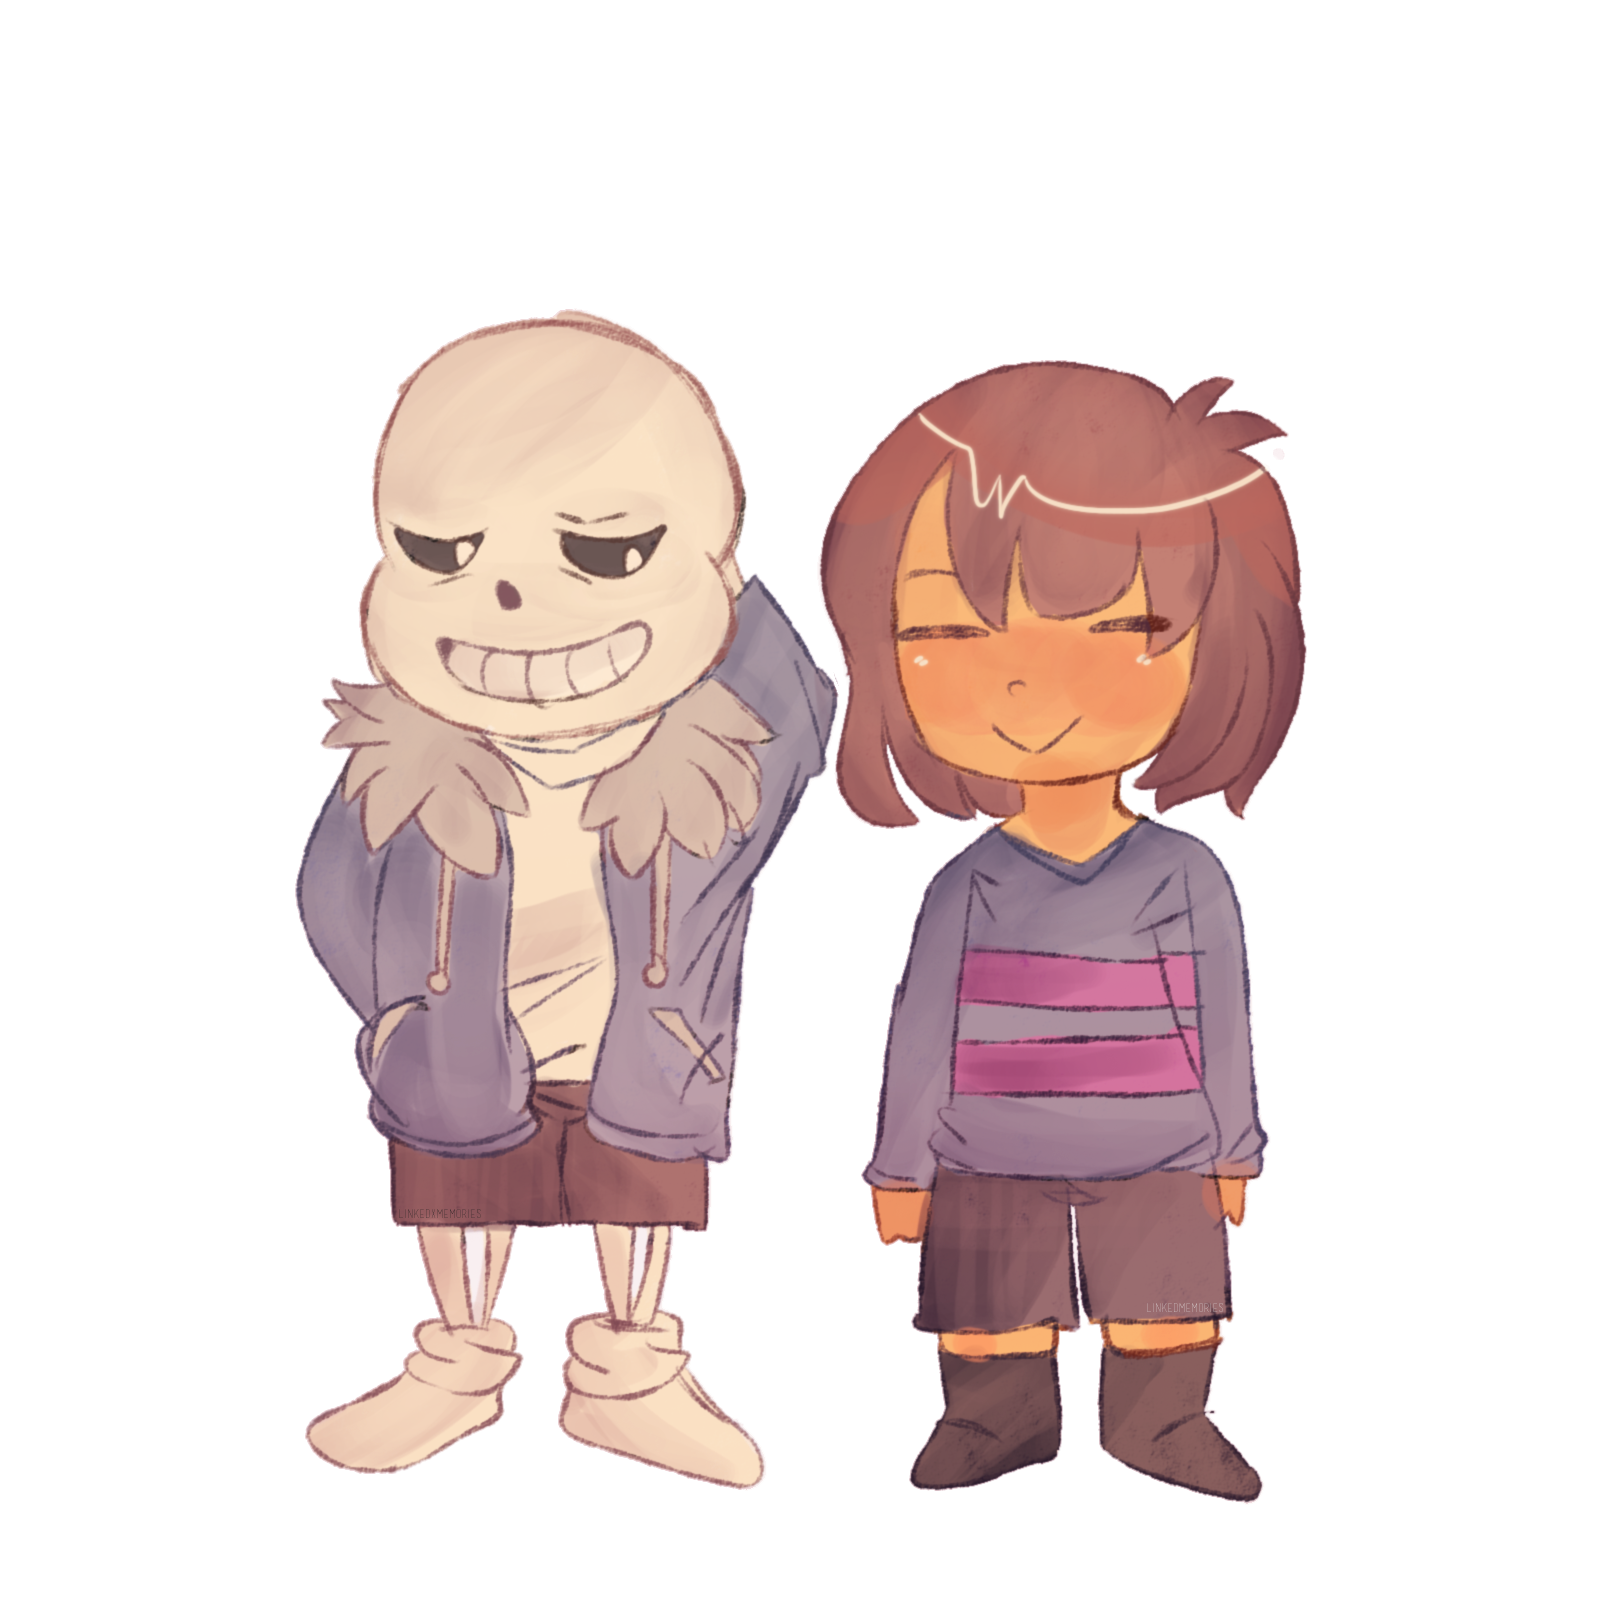 Sans X Frisk Chibi All in one Photos 